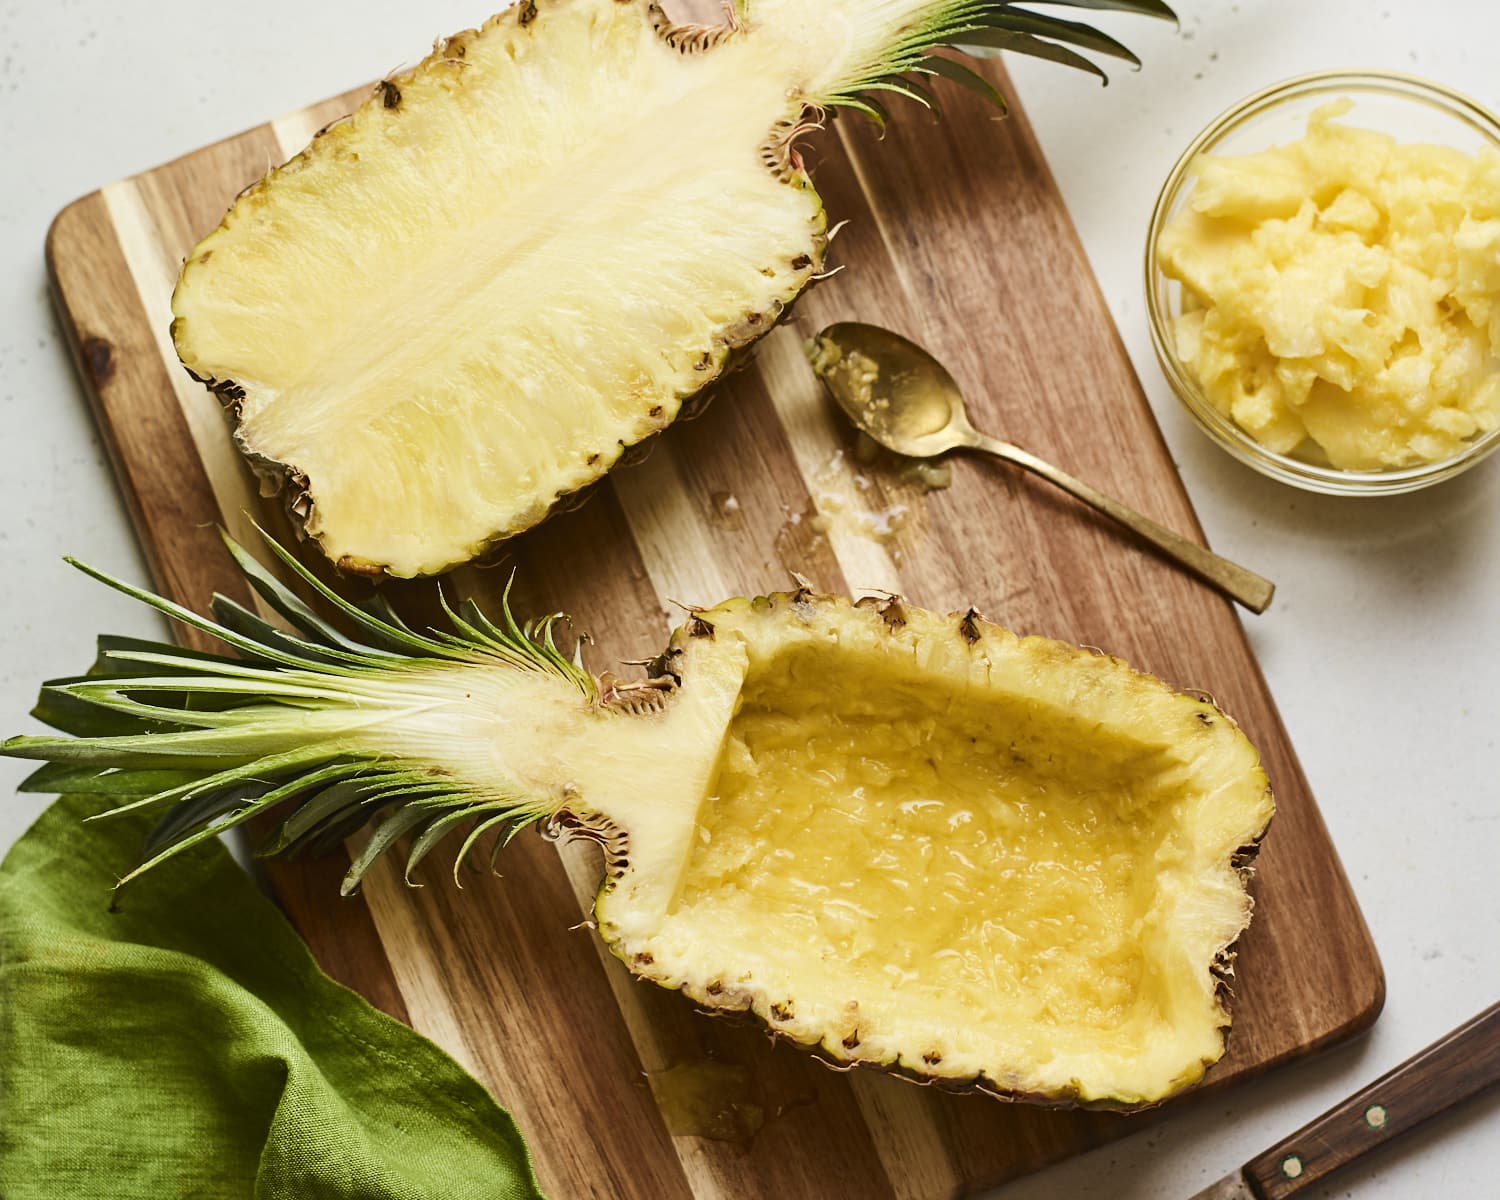 Two halves of pineapple on a cutting board. One half is scooped out.